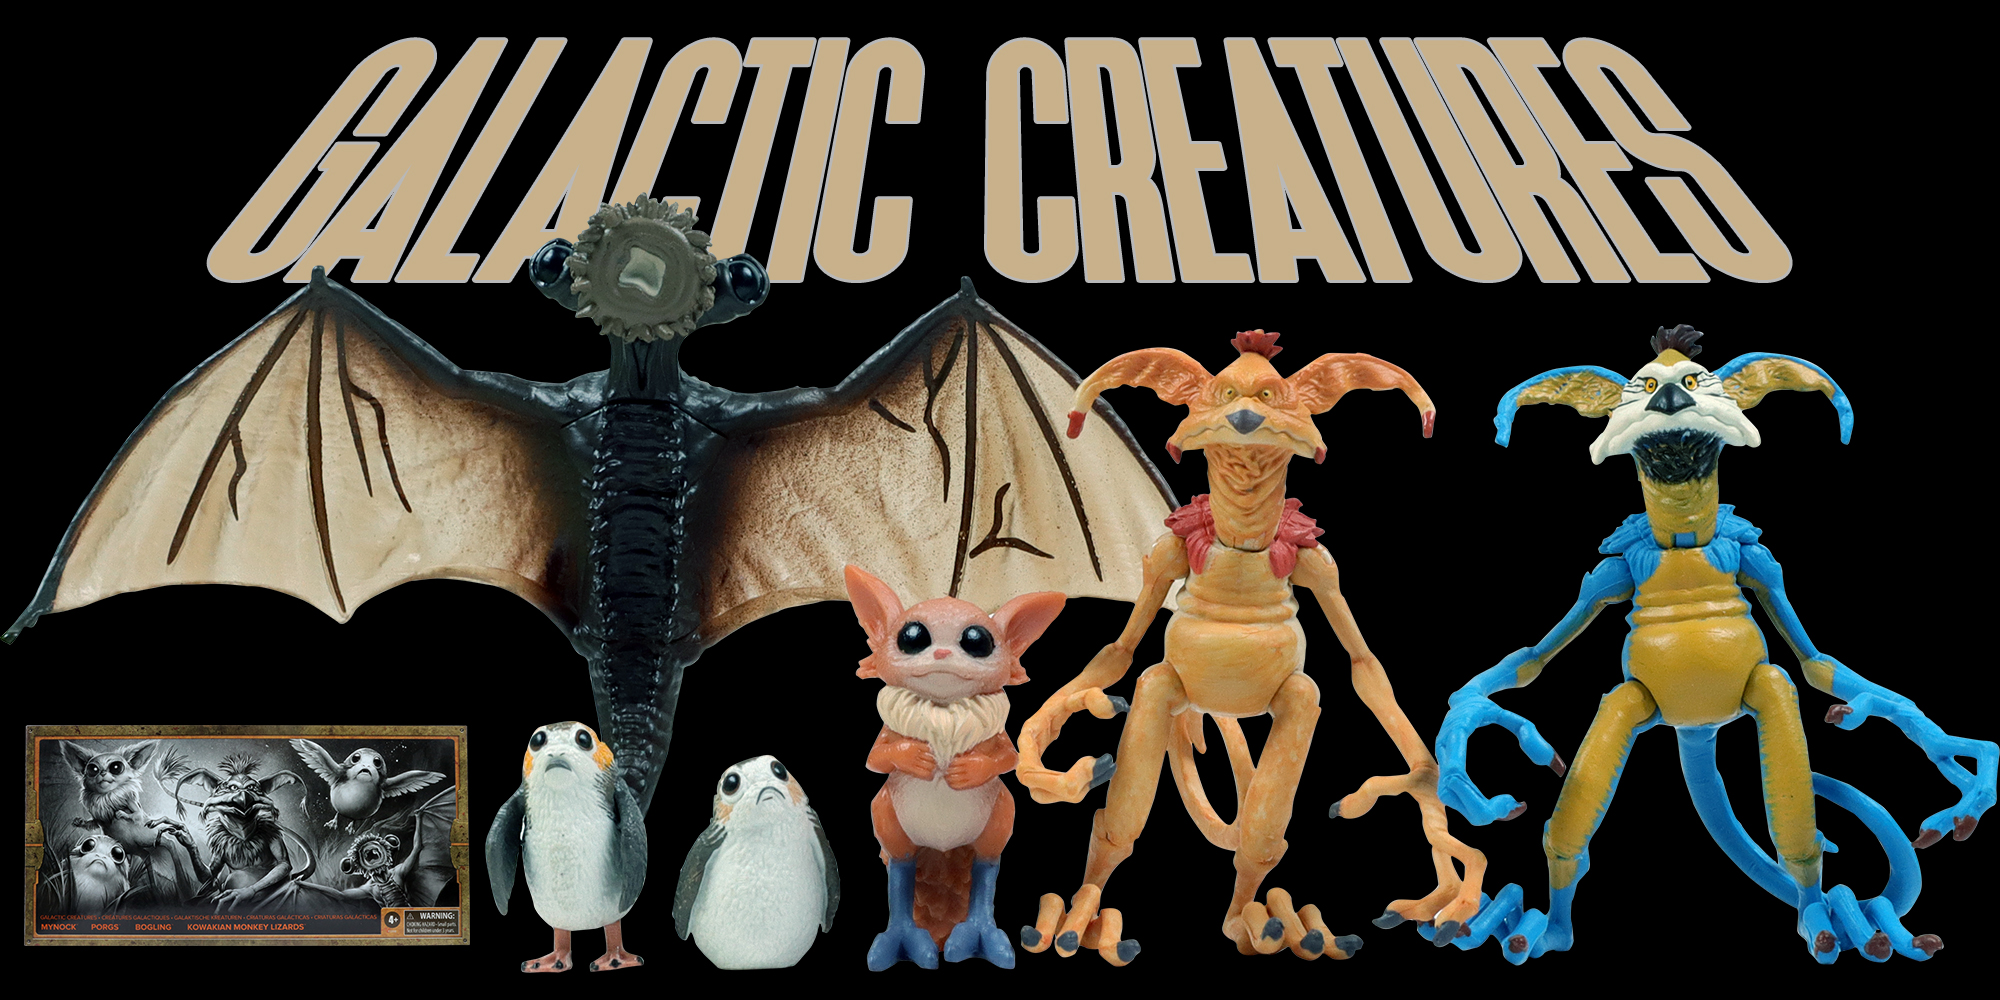 Spice Up Your Collection With Galactic Creatures!